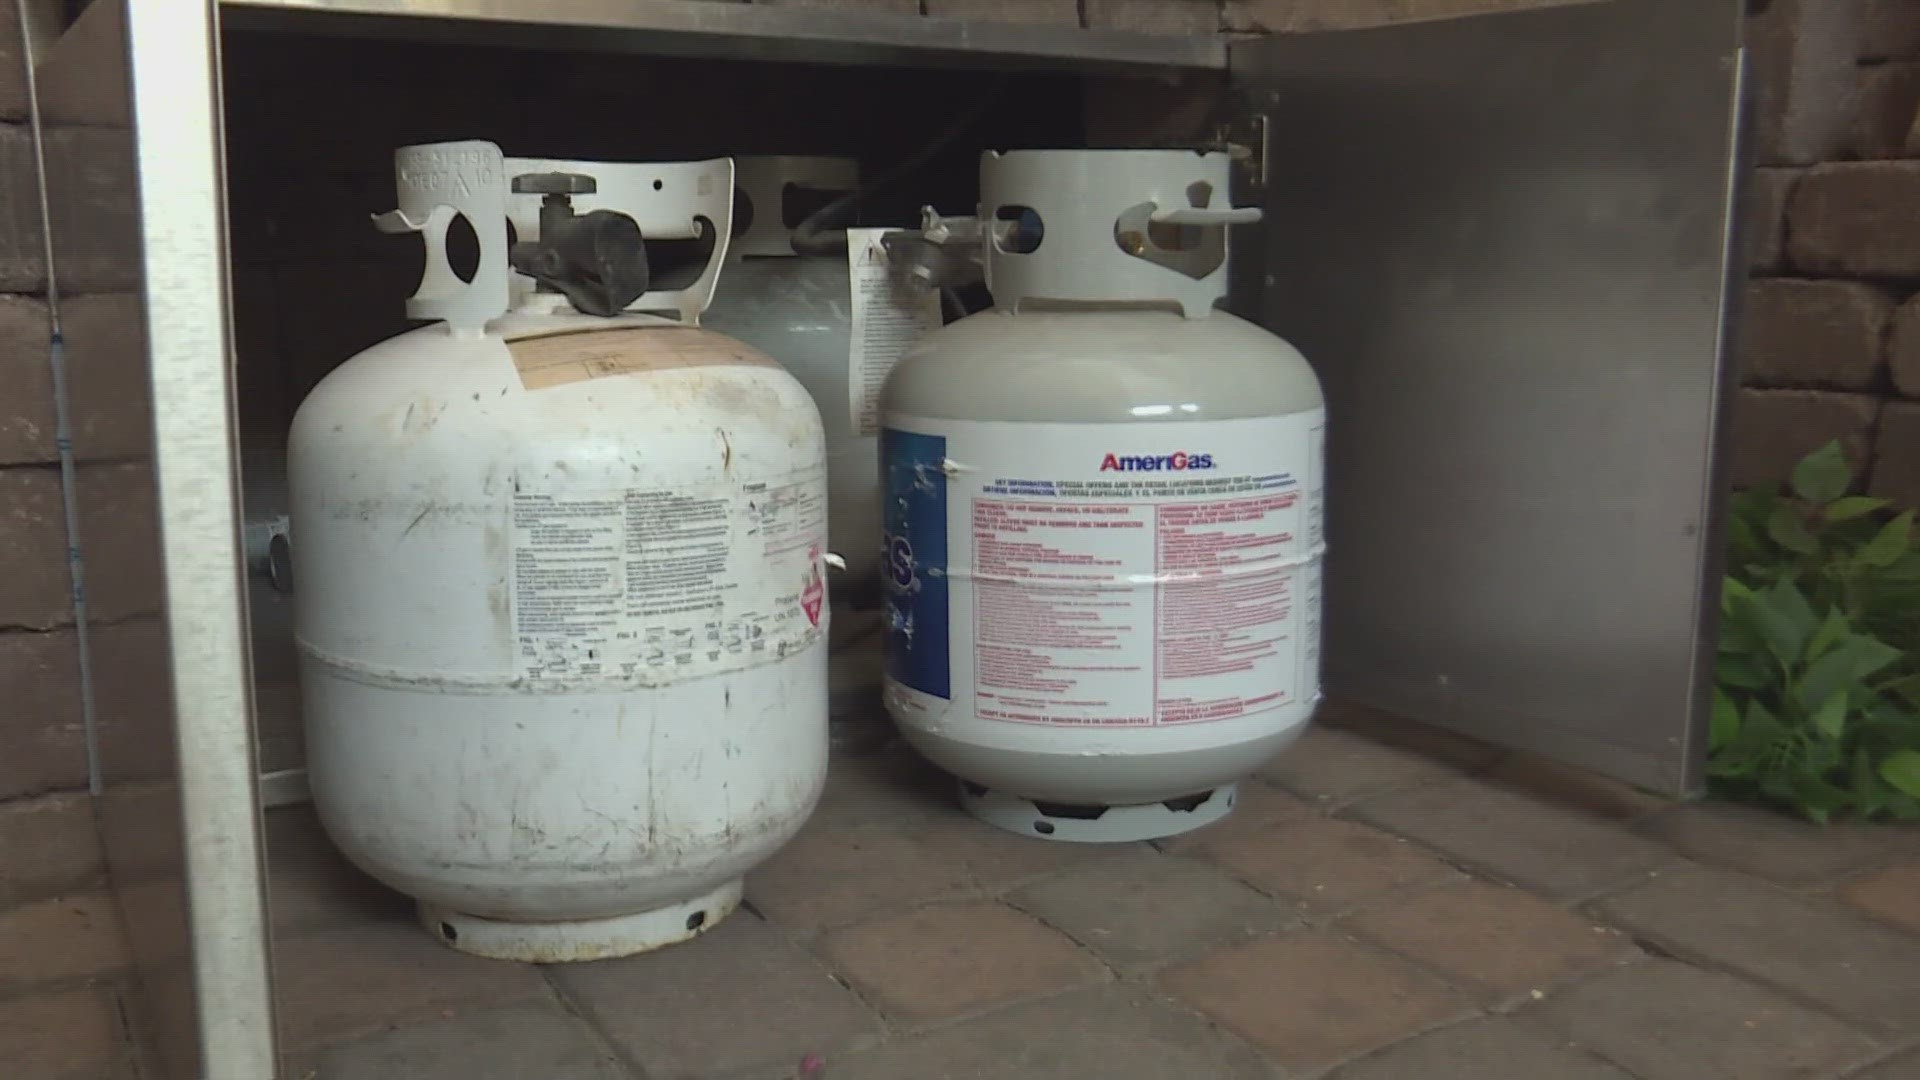 One expert says if the tanks are constructed properly, they should not cause harm. He also says to keep your propane tanks away from other ignition sources.